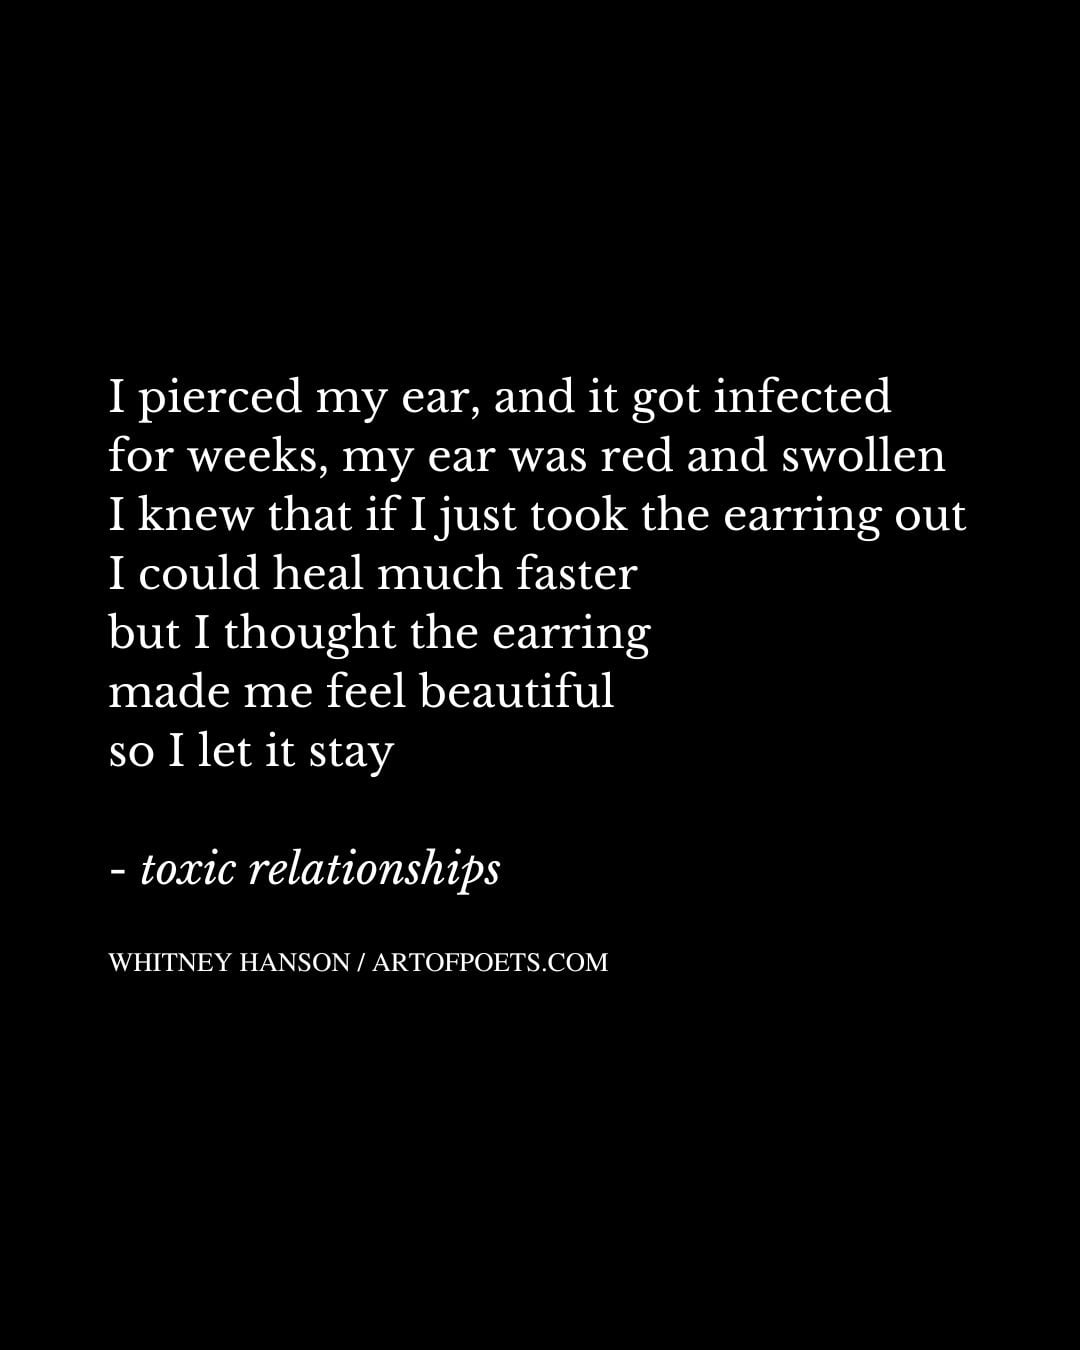 I pierced my ear and it got infected for weeks my ear was red and swollen I knew that if I just took the earring out